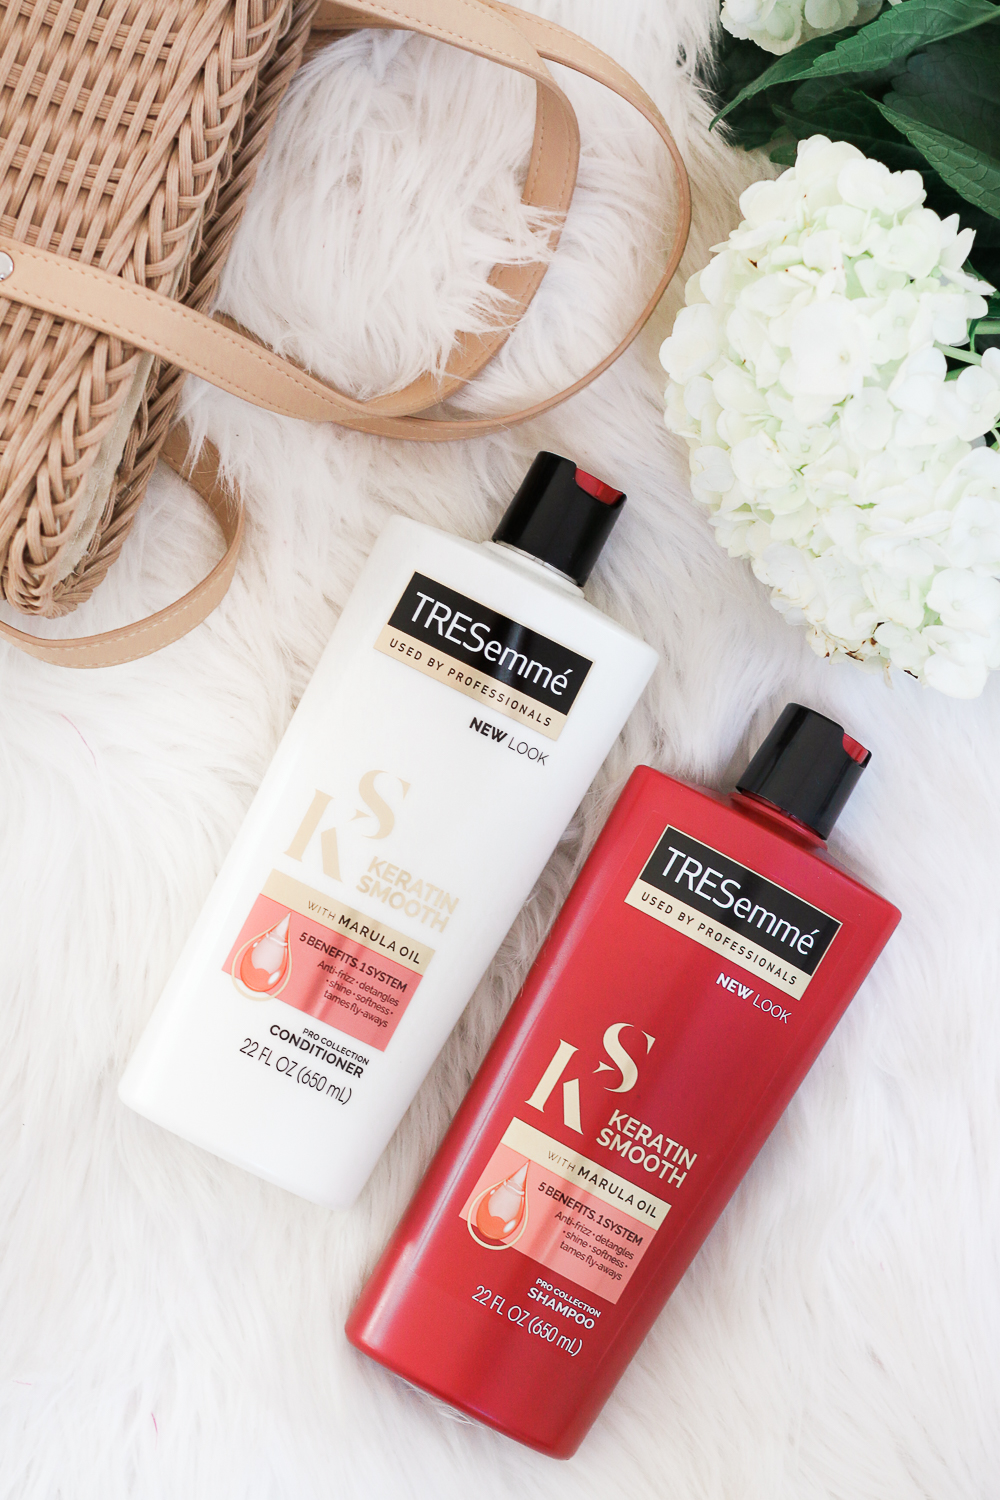 Target Spring Shopping Haul: Top Fashion and Beauty Finds by affordable fashion blogger Stephanie Ziajka from Diary of a Debutante, TreSemme Keratin Smooth Shampoo and Conditioner at Target